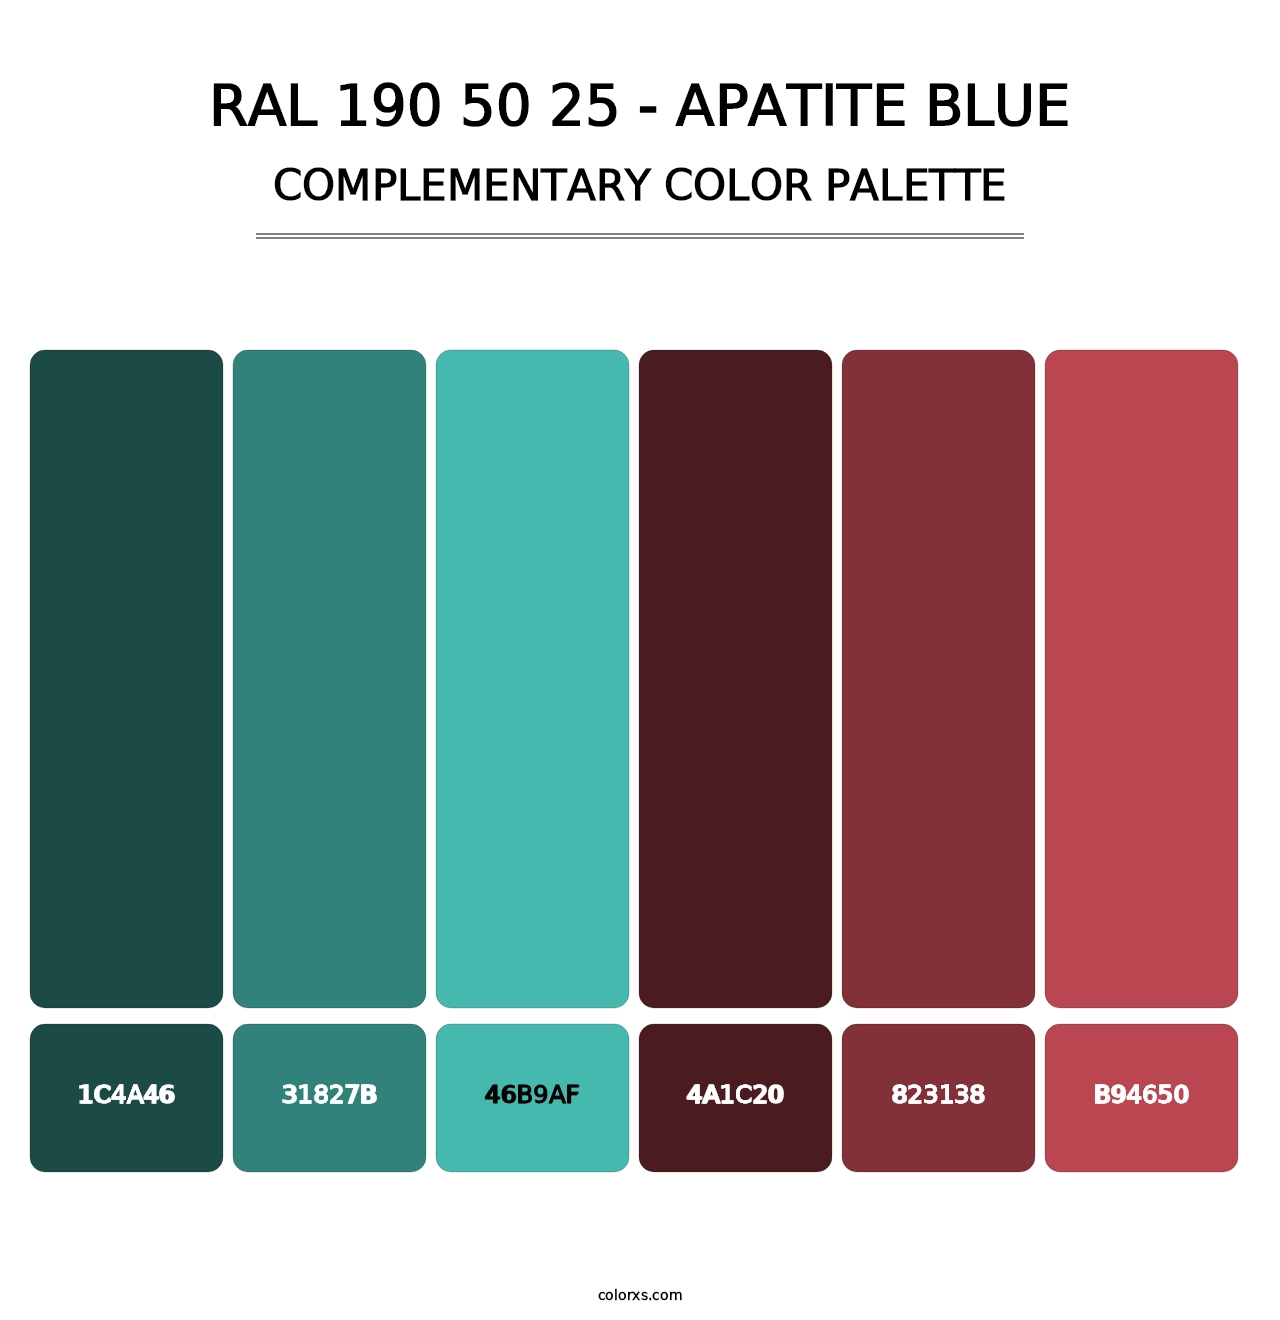 RAL 190 50 25 - Apatite Blue - Complementary Color Palette